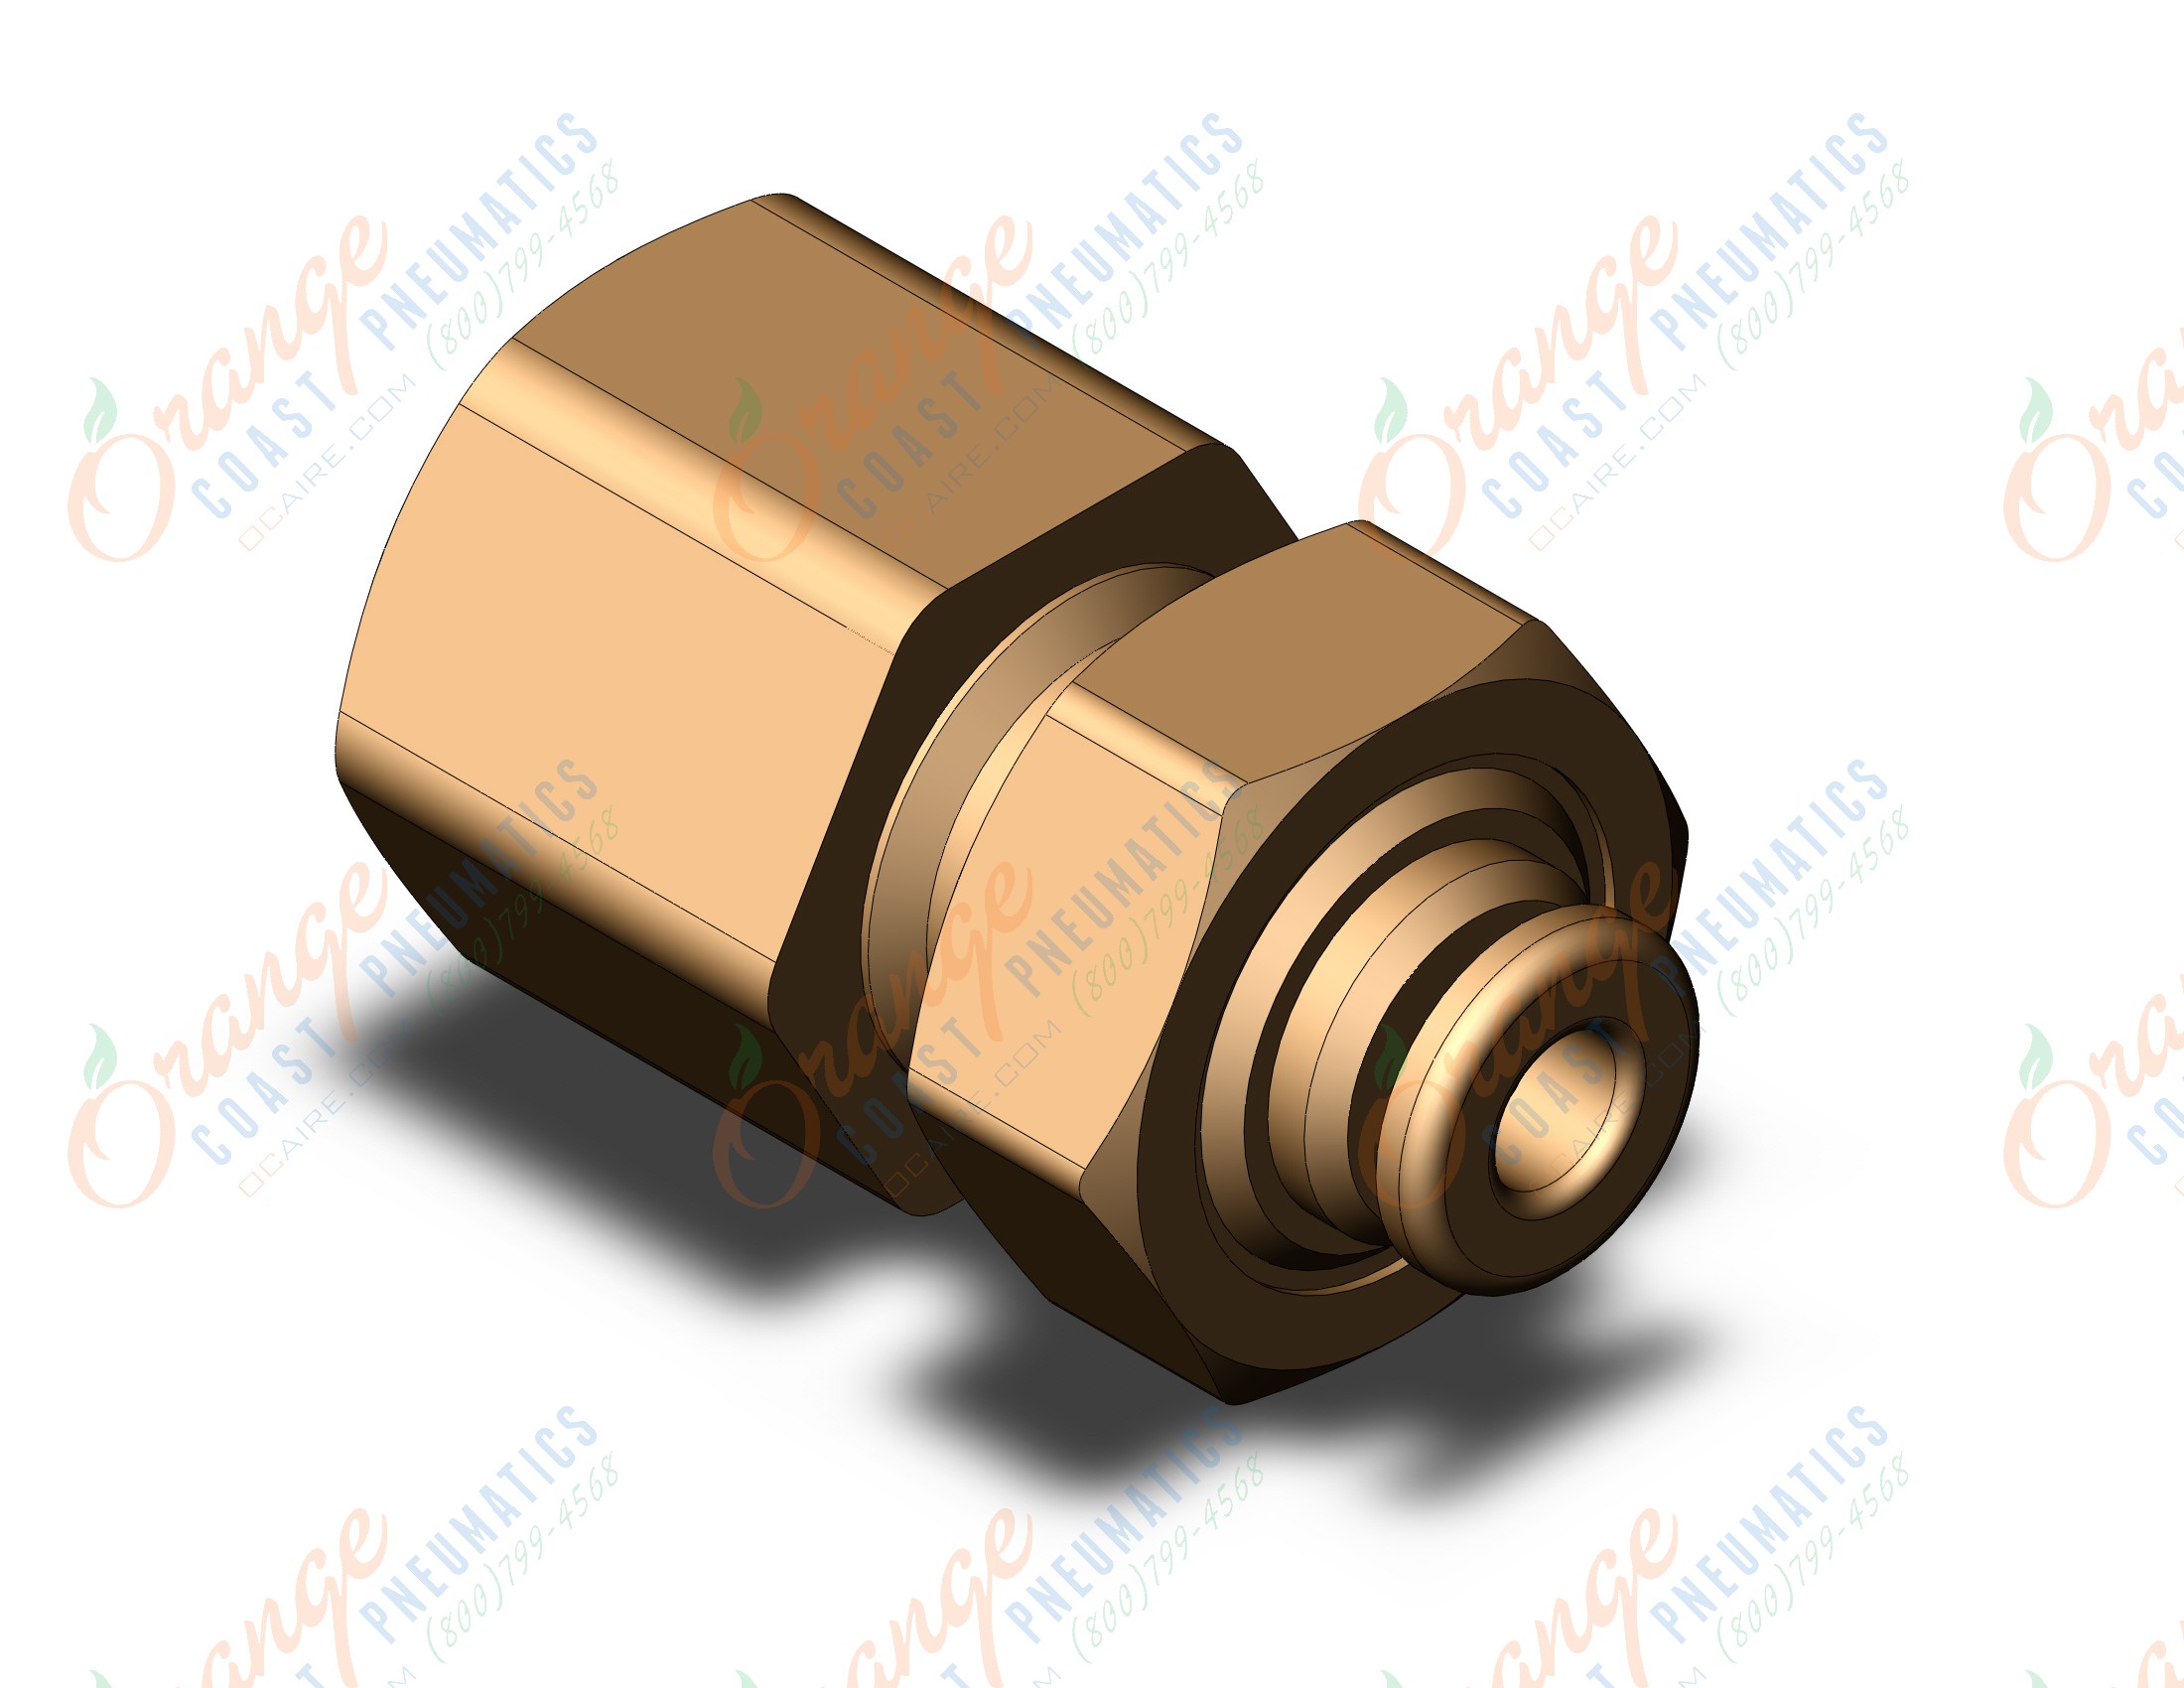 SMC KV2E03-35 fitting, bulkhead connector, KV2 FITTING (sold in packages of 10; price is per piece)